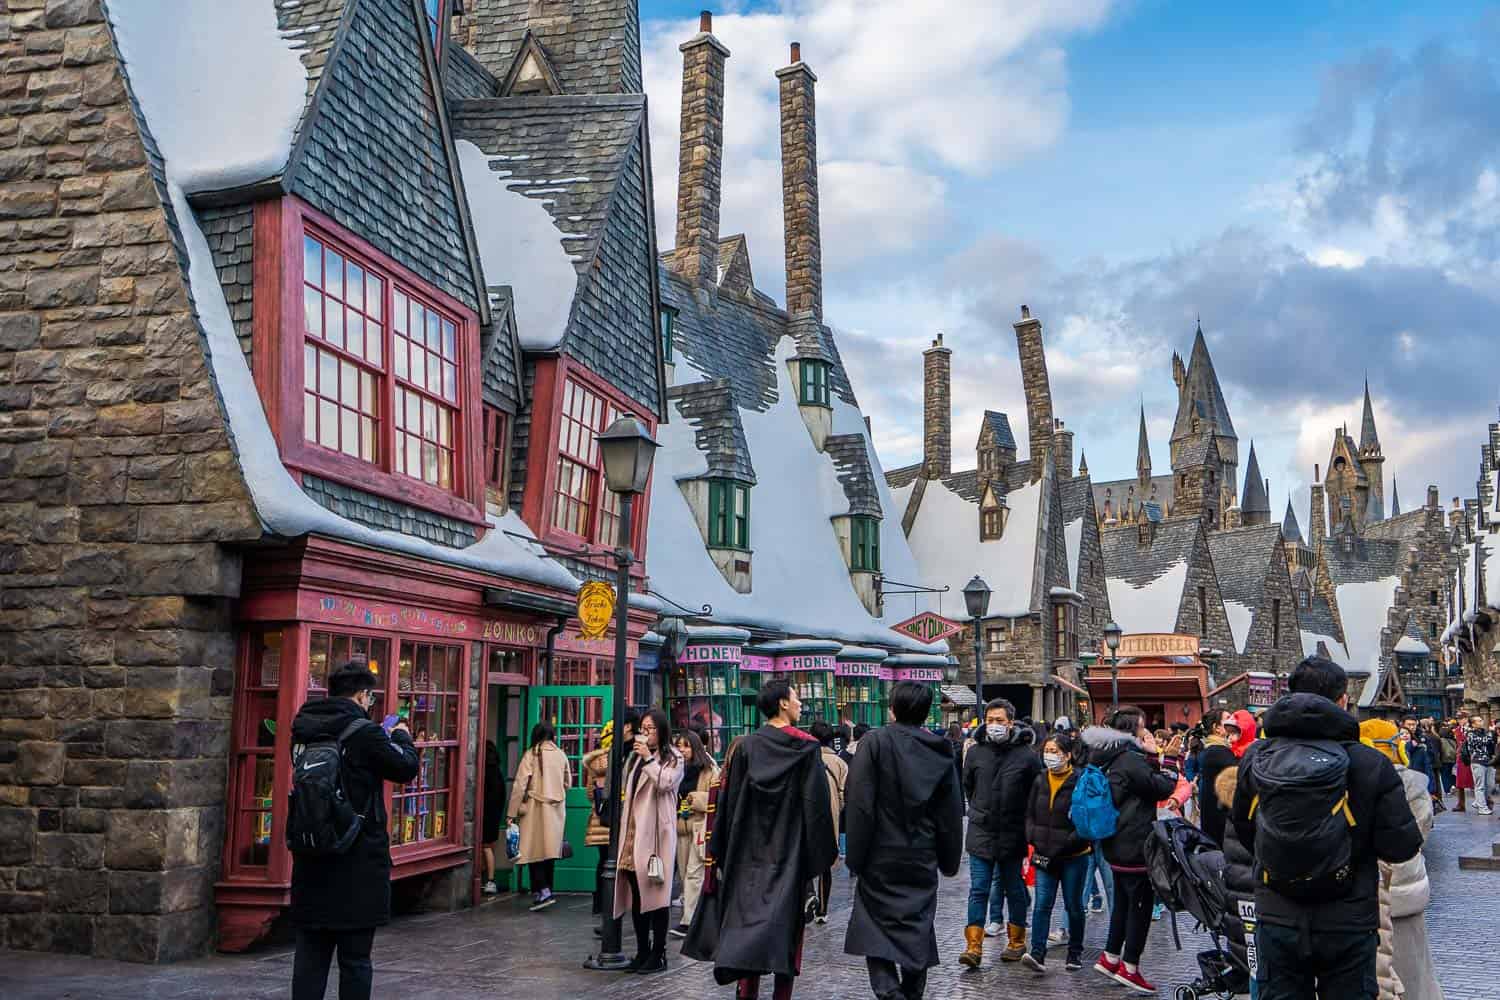 Hogsmeade village shops in The Wizarding World of Harry Potter at Universal Studios Japan in Osaka